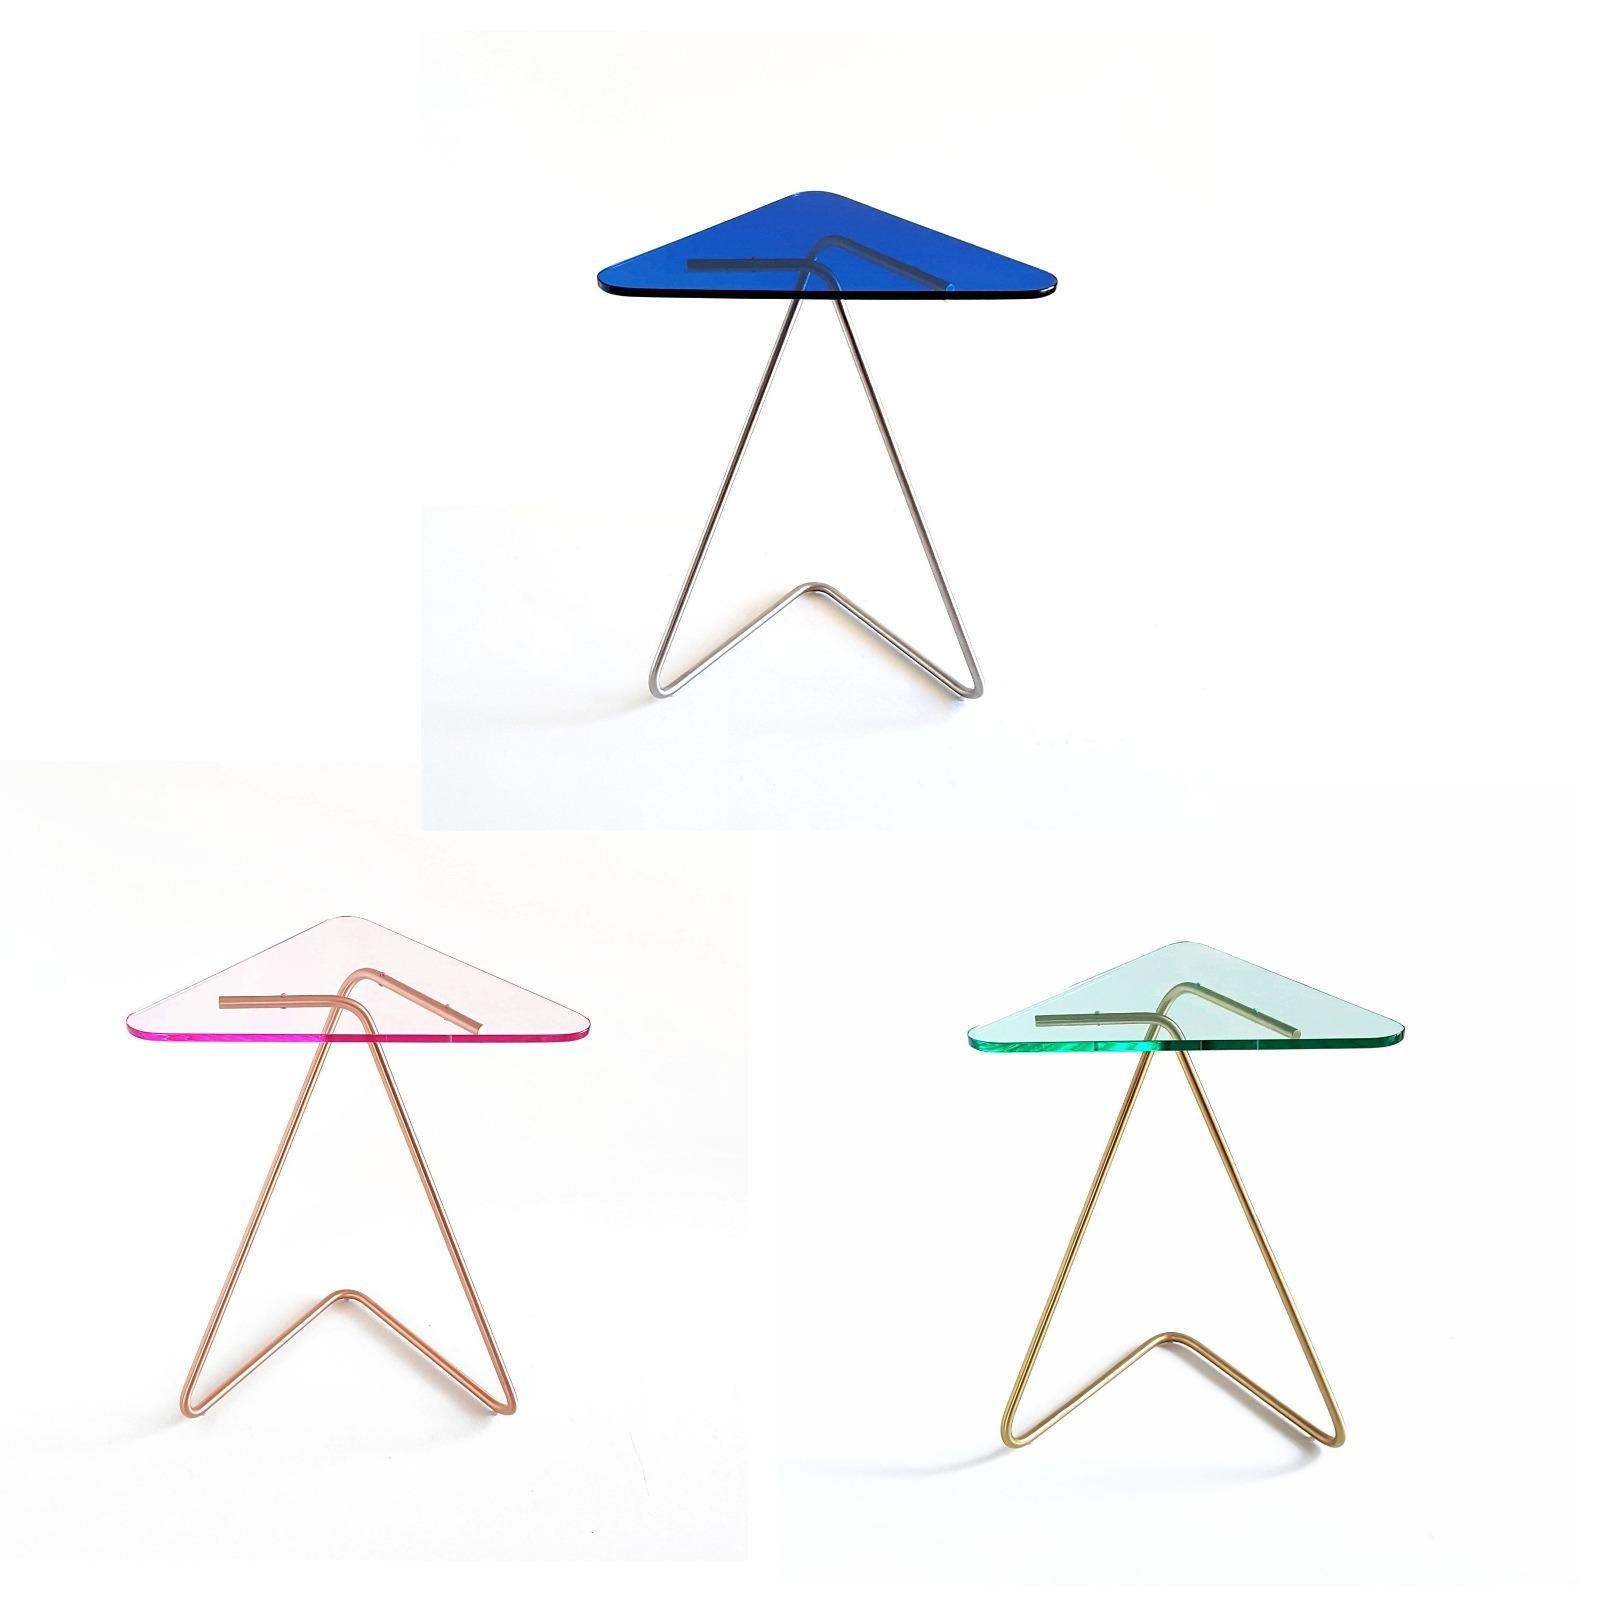 Set of 3 triangle side table by Rita Kettaneh 
Dimensions: The base: brushed stainless steel 
 optionally plated with copper or brass
 The top: acrylic
Materials: H 49.5 x W 41 x D 9.5 cm
Weight: 2.6 Kg

Colors and finishes:
Stainless